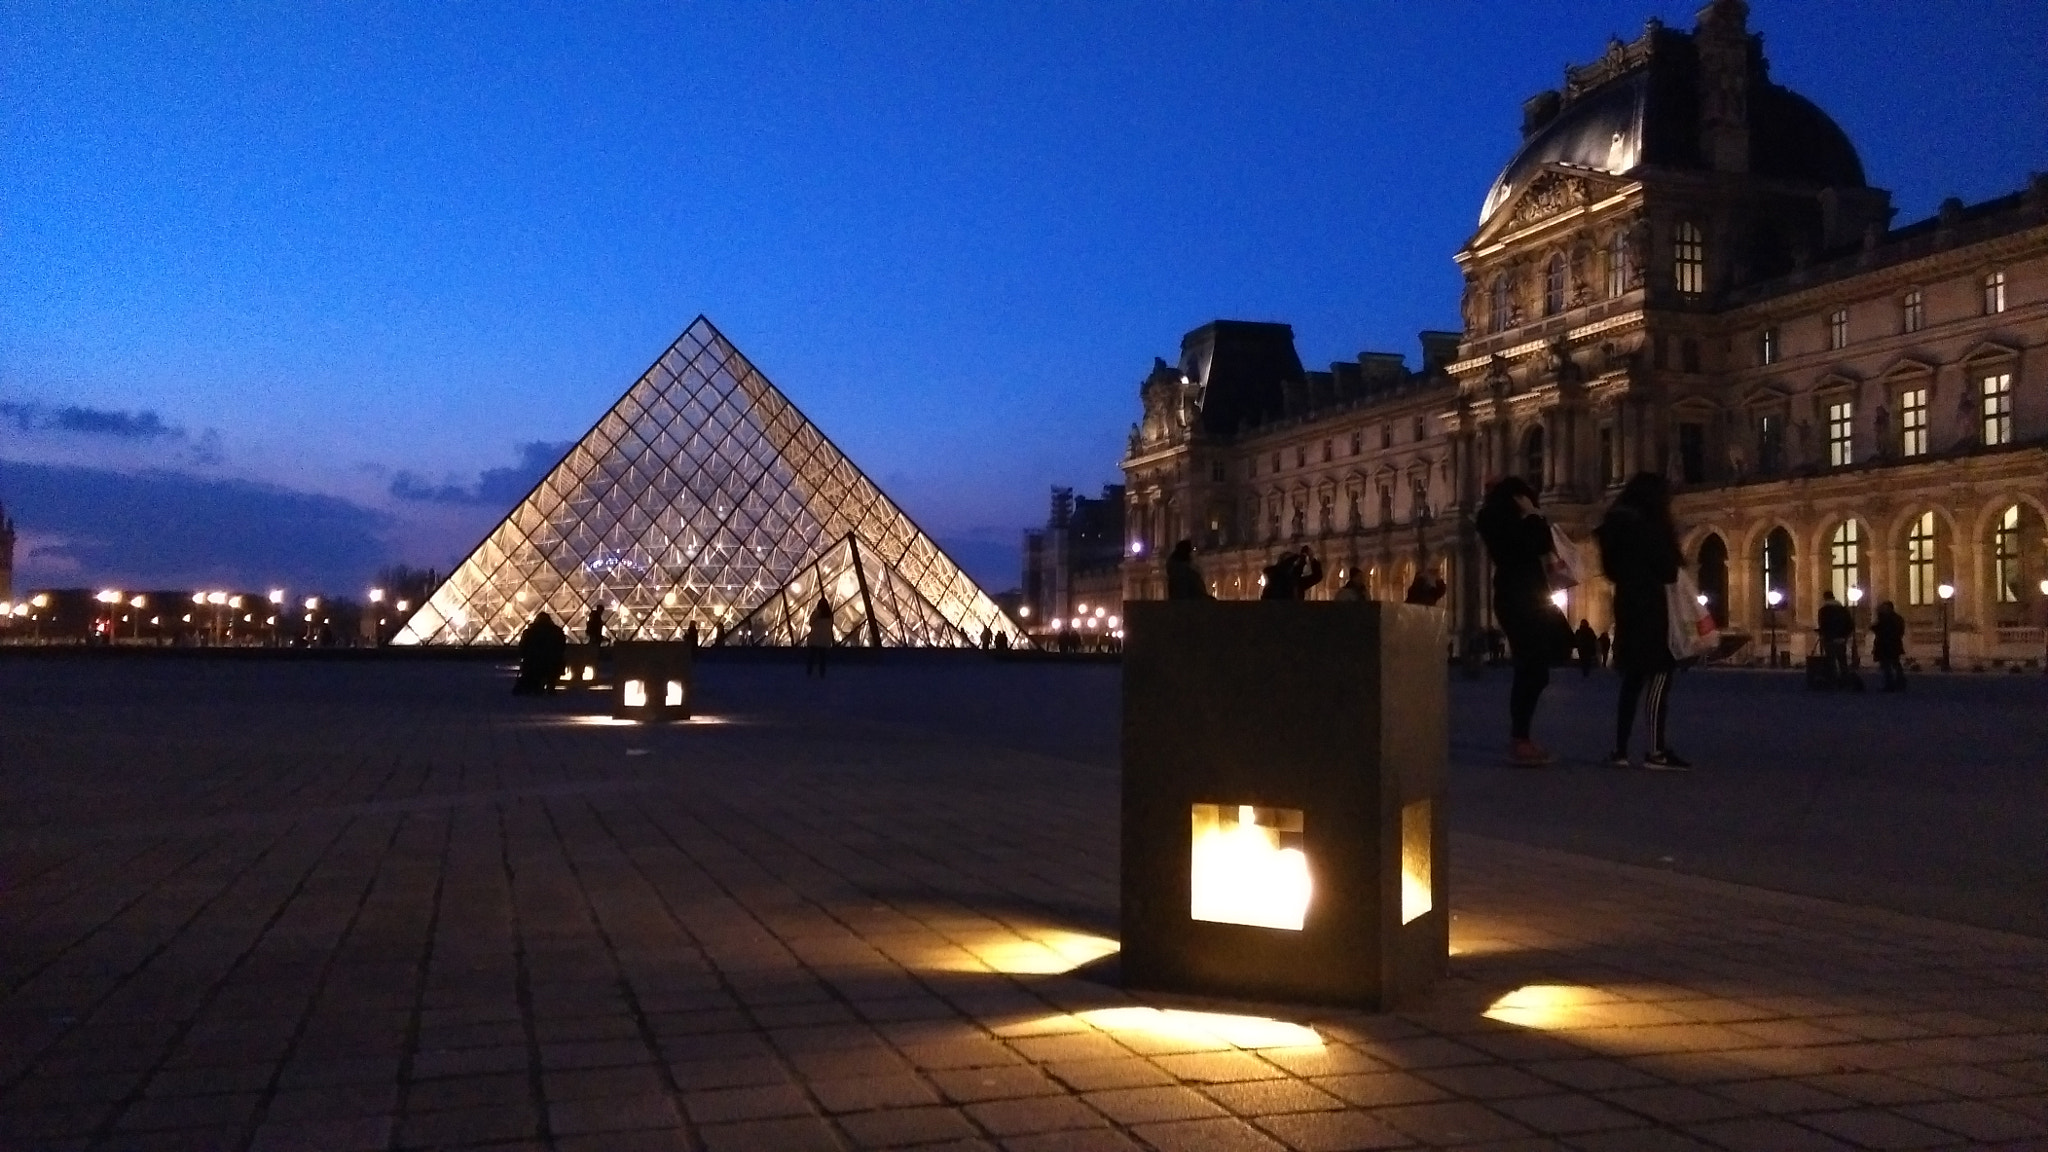 HTC ONE M8S sample photo. Louvre photography